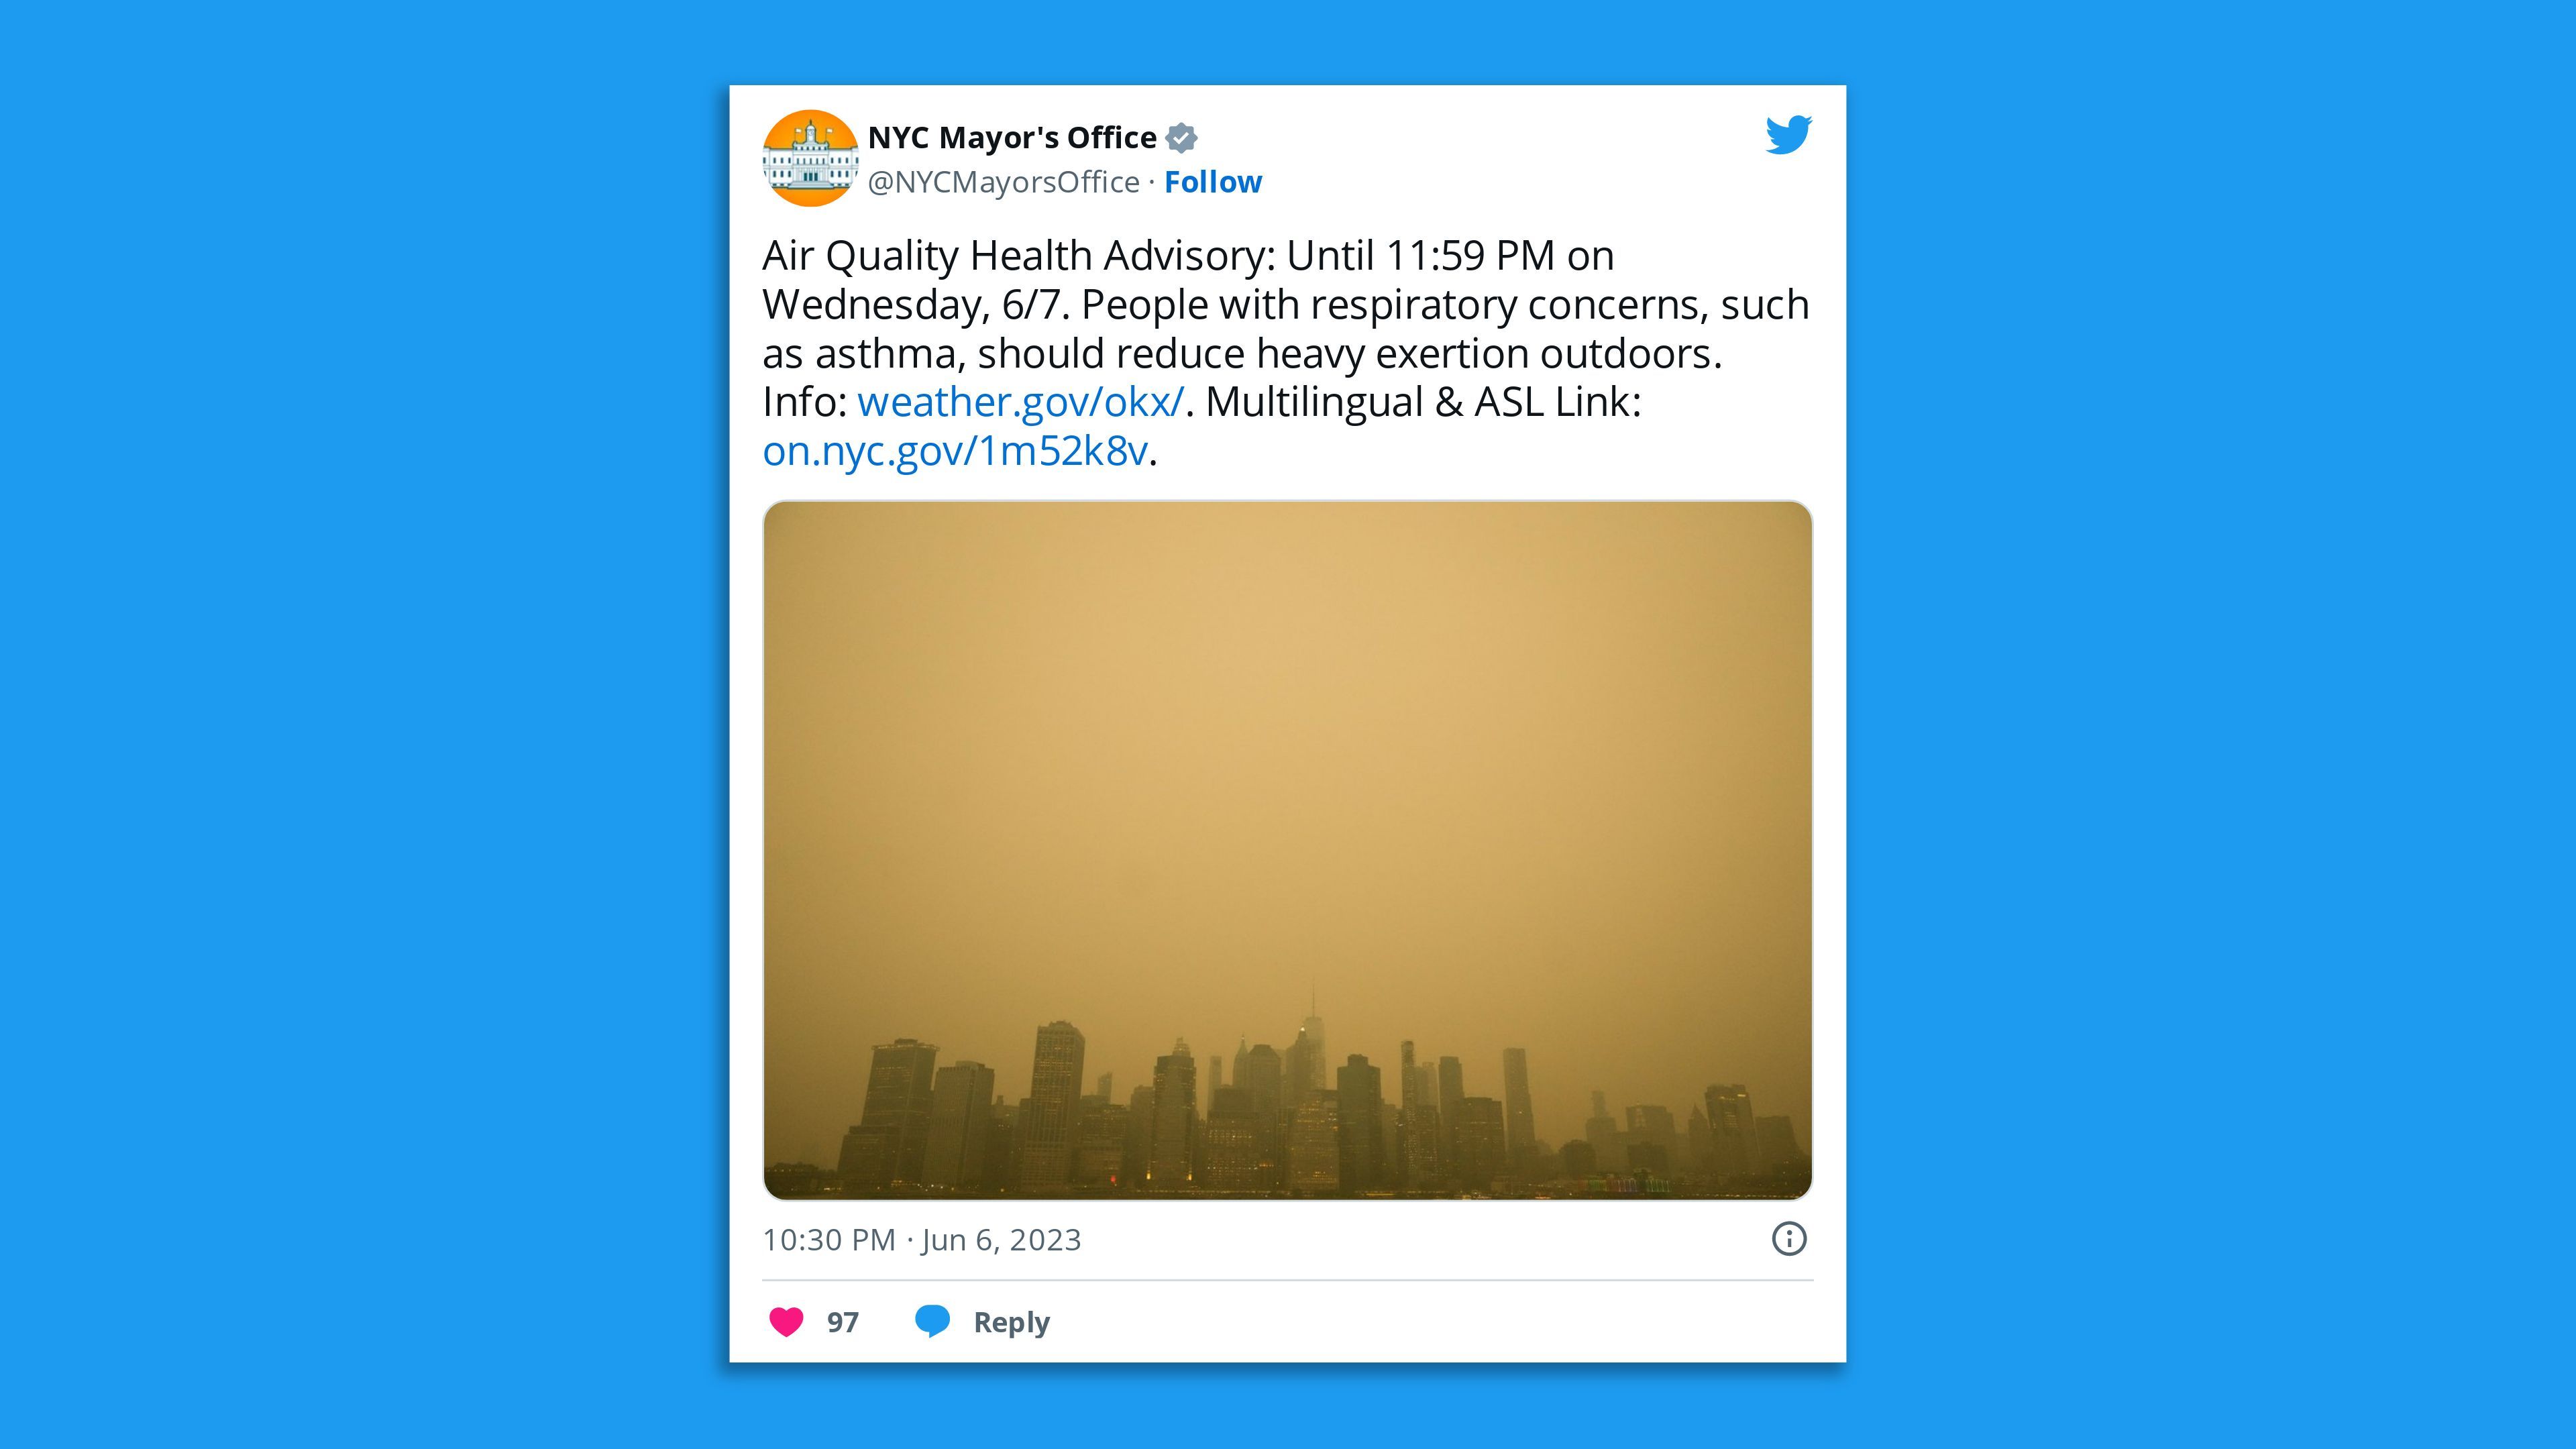 A screenshot of a tweet from the New York City mayor's office saying: "Air Quality Health Advisory: Until 11:59 PM on Wednesday, 6/7. People with respiratory concerns, such as asthma, should reduce heavy exertion outdoors."